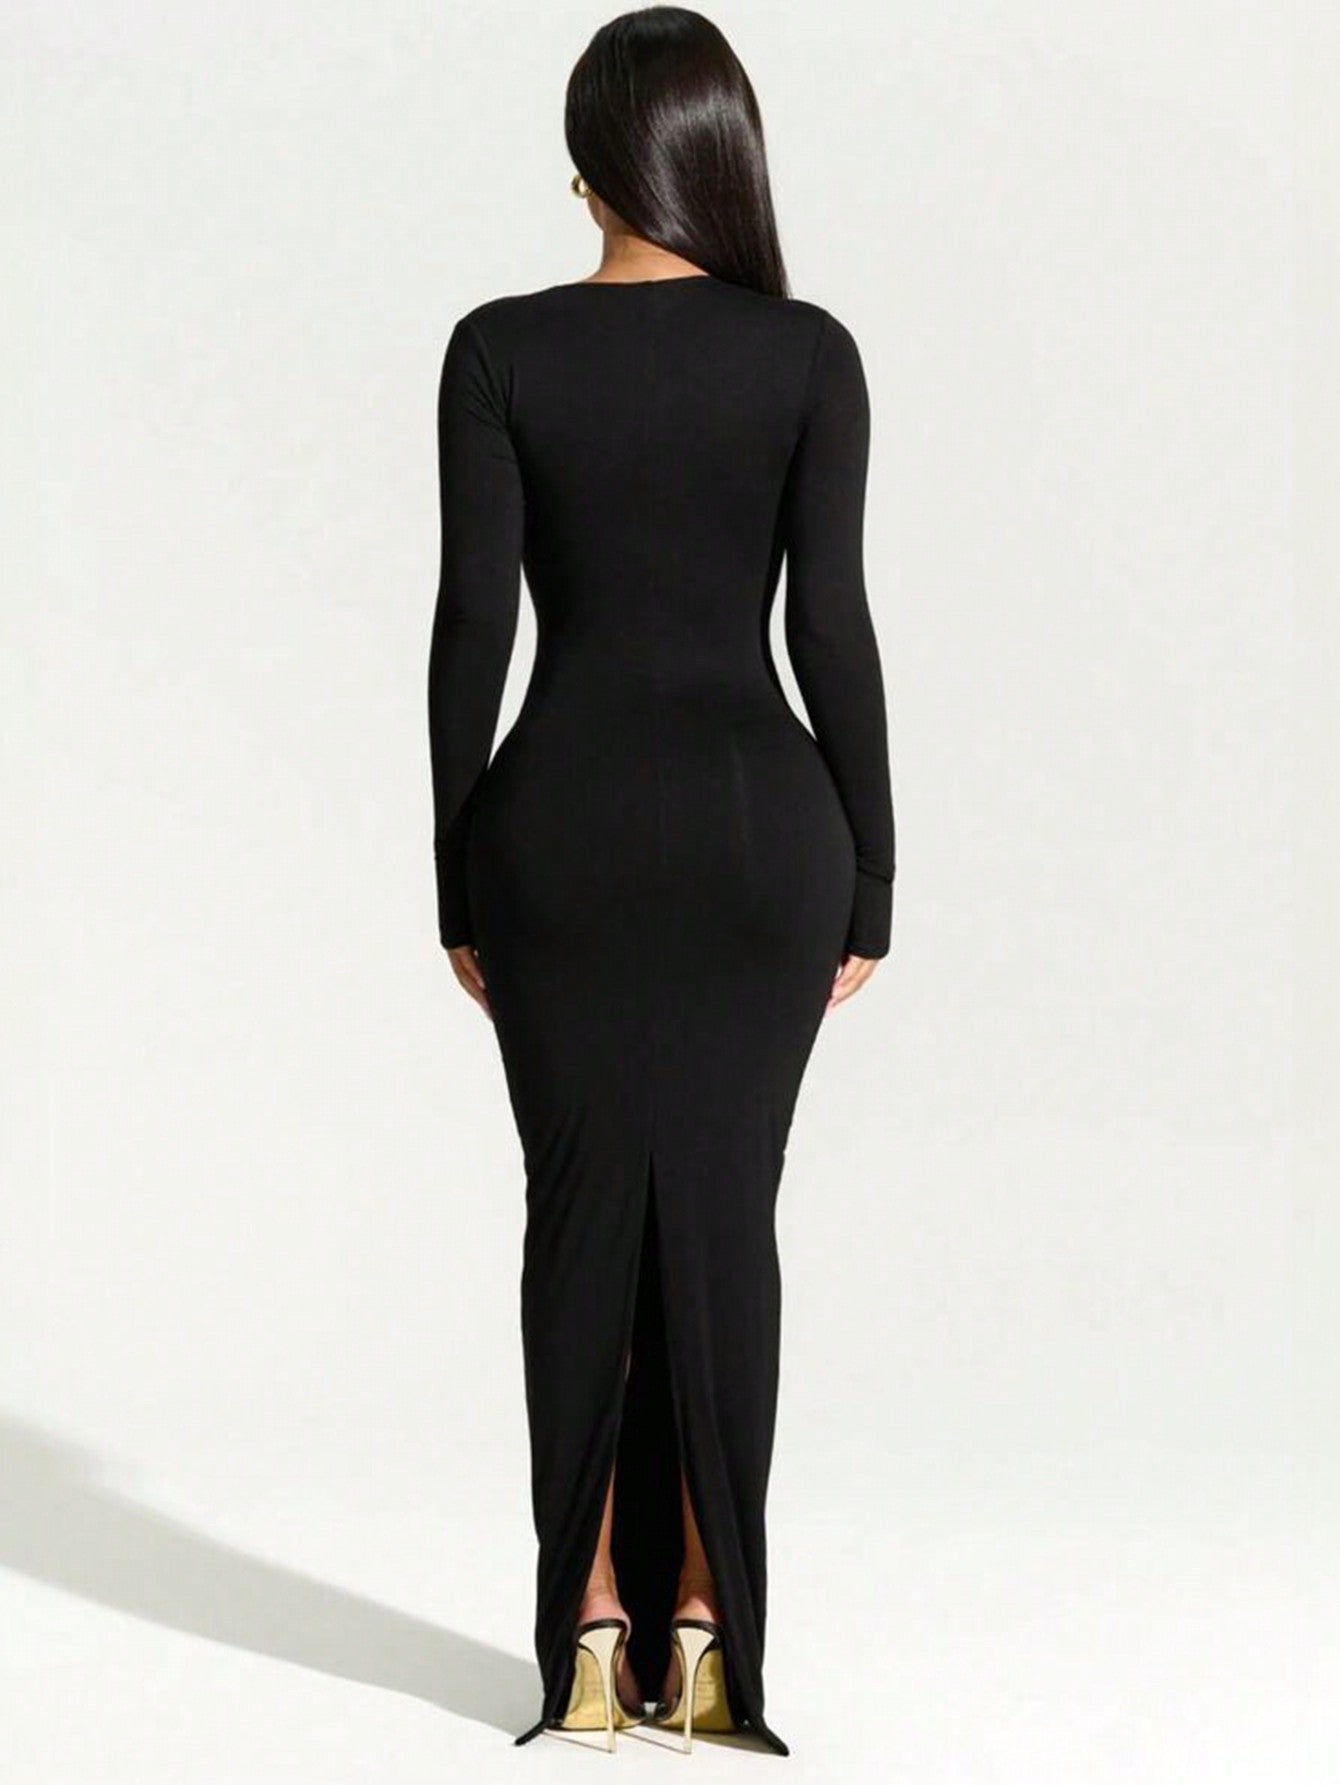 Women's Sexy Off-Shoulder Long Sleeve Bodycon Evening Dress With High Slit